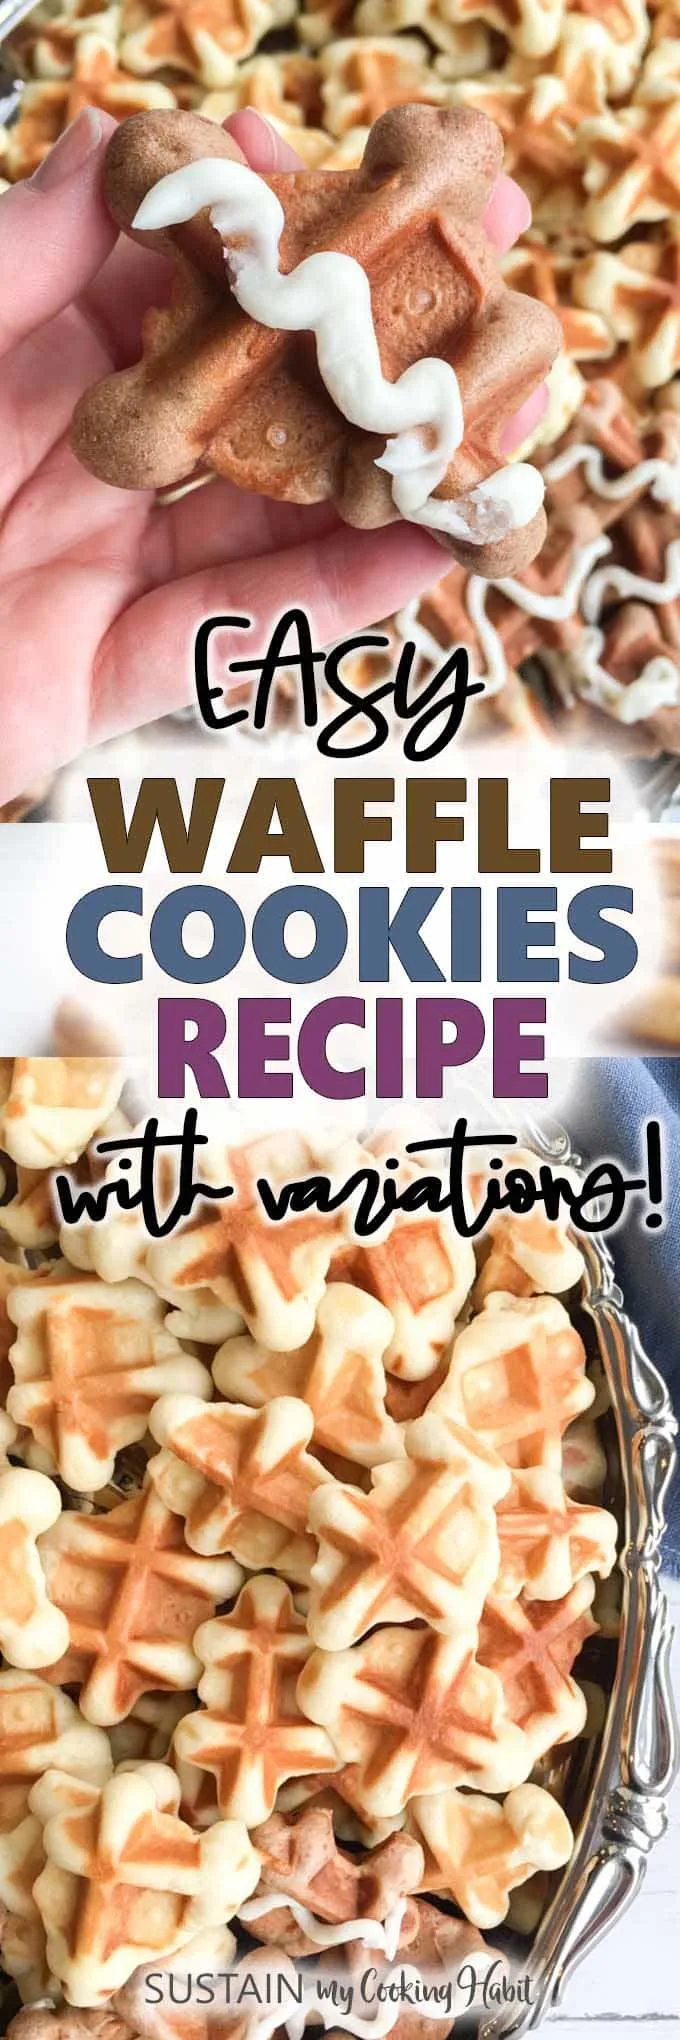 Collage of images with text overlay saying easy waffle cookies recipe with variations.